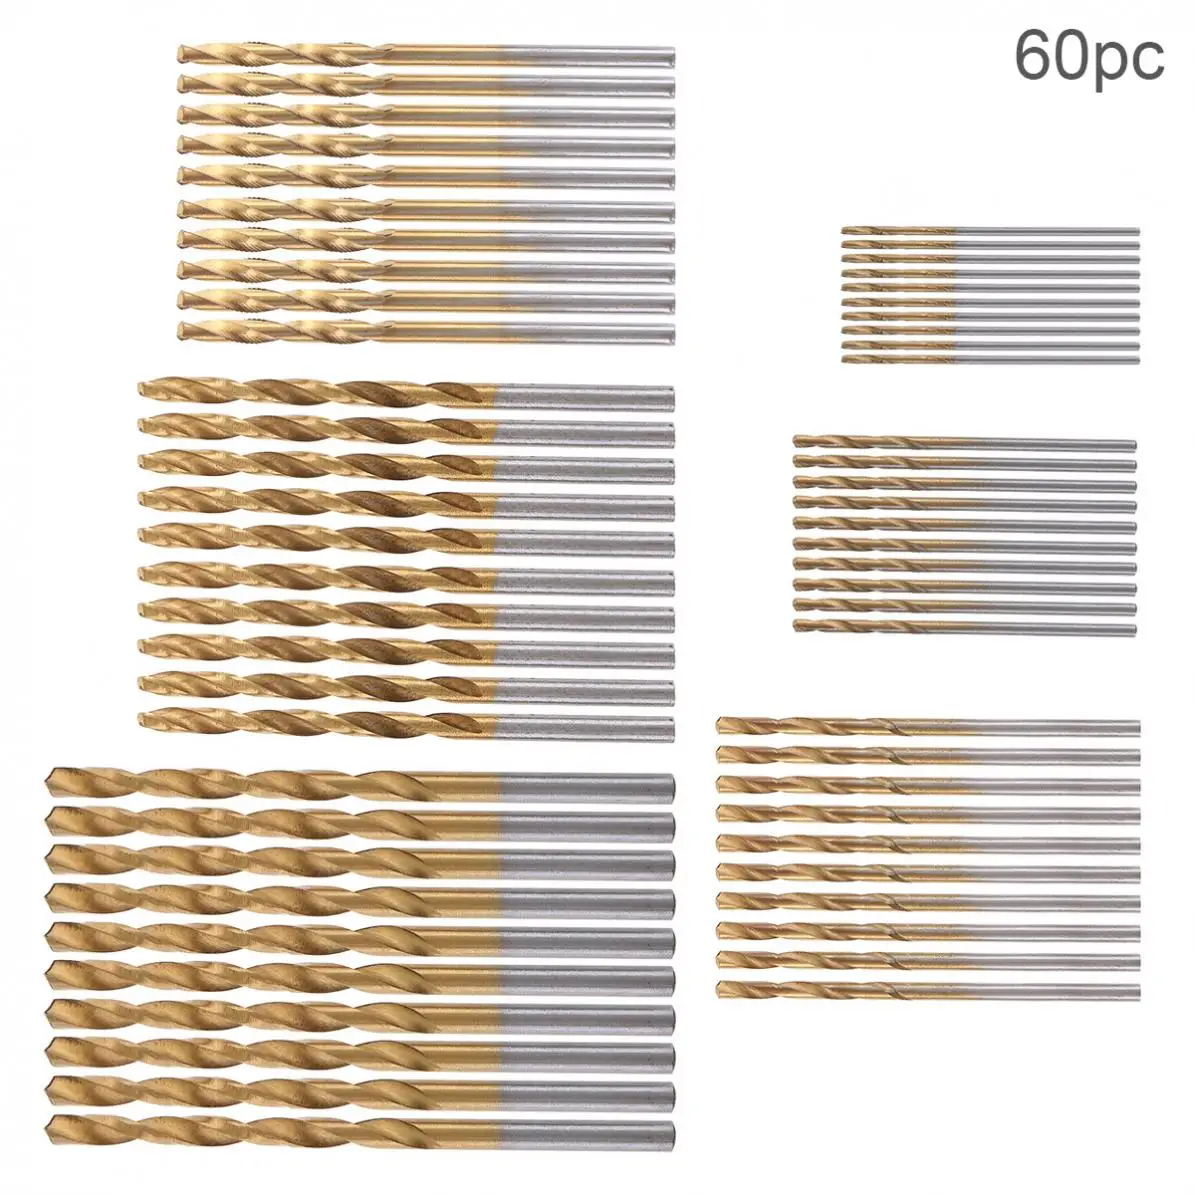 

60pcs/lot High Speed Metric HSS Twist Drill Bits Coated Set 1.0MM - 3.5MM Cutting Resistance for Hole Punch